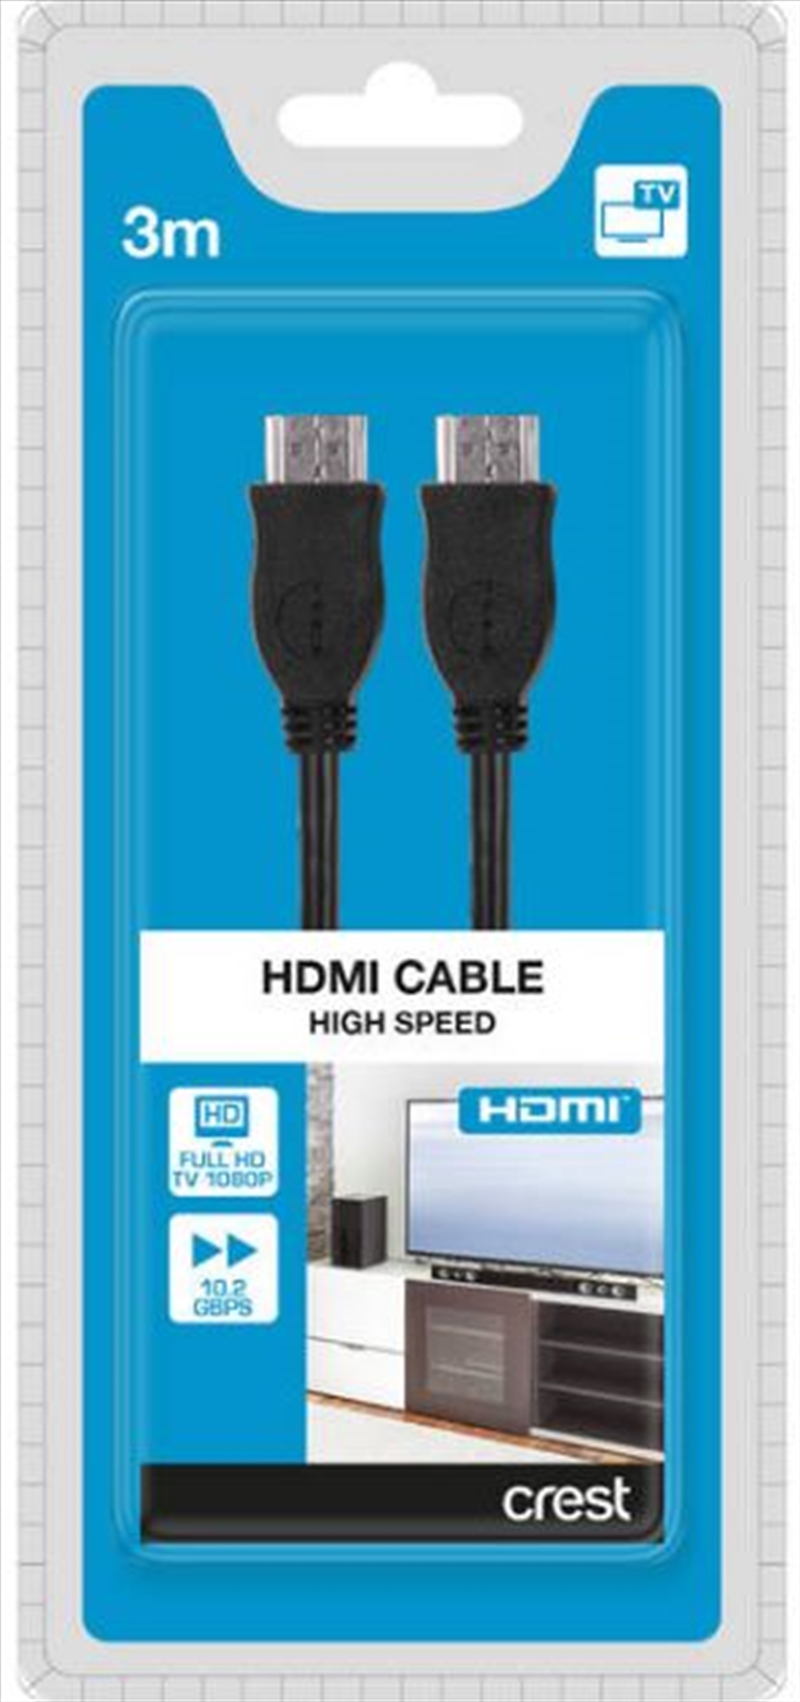 High Speed HDMI Cable - 3M/Product Detail/Cables